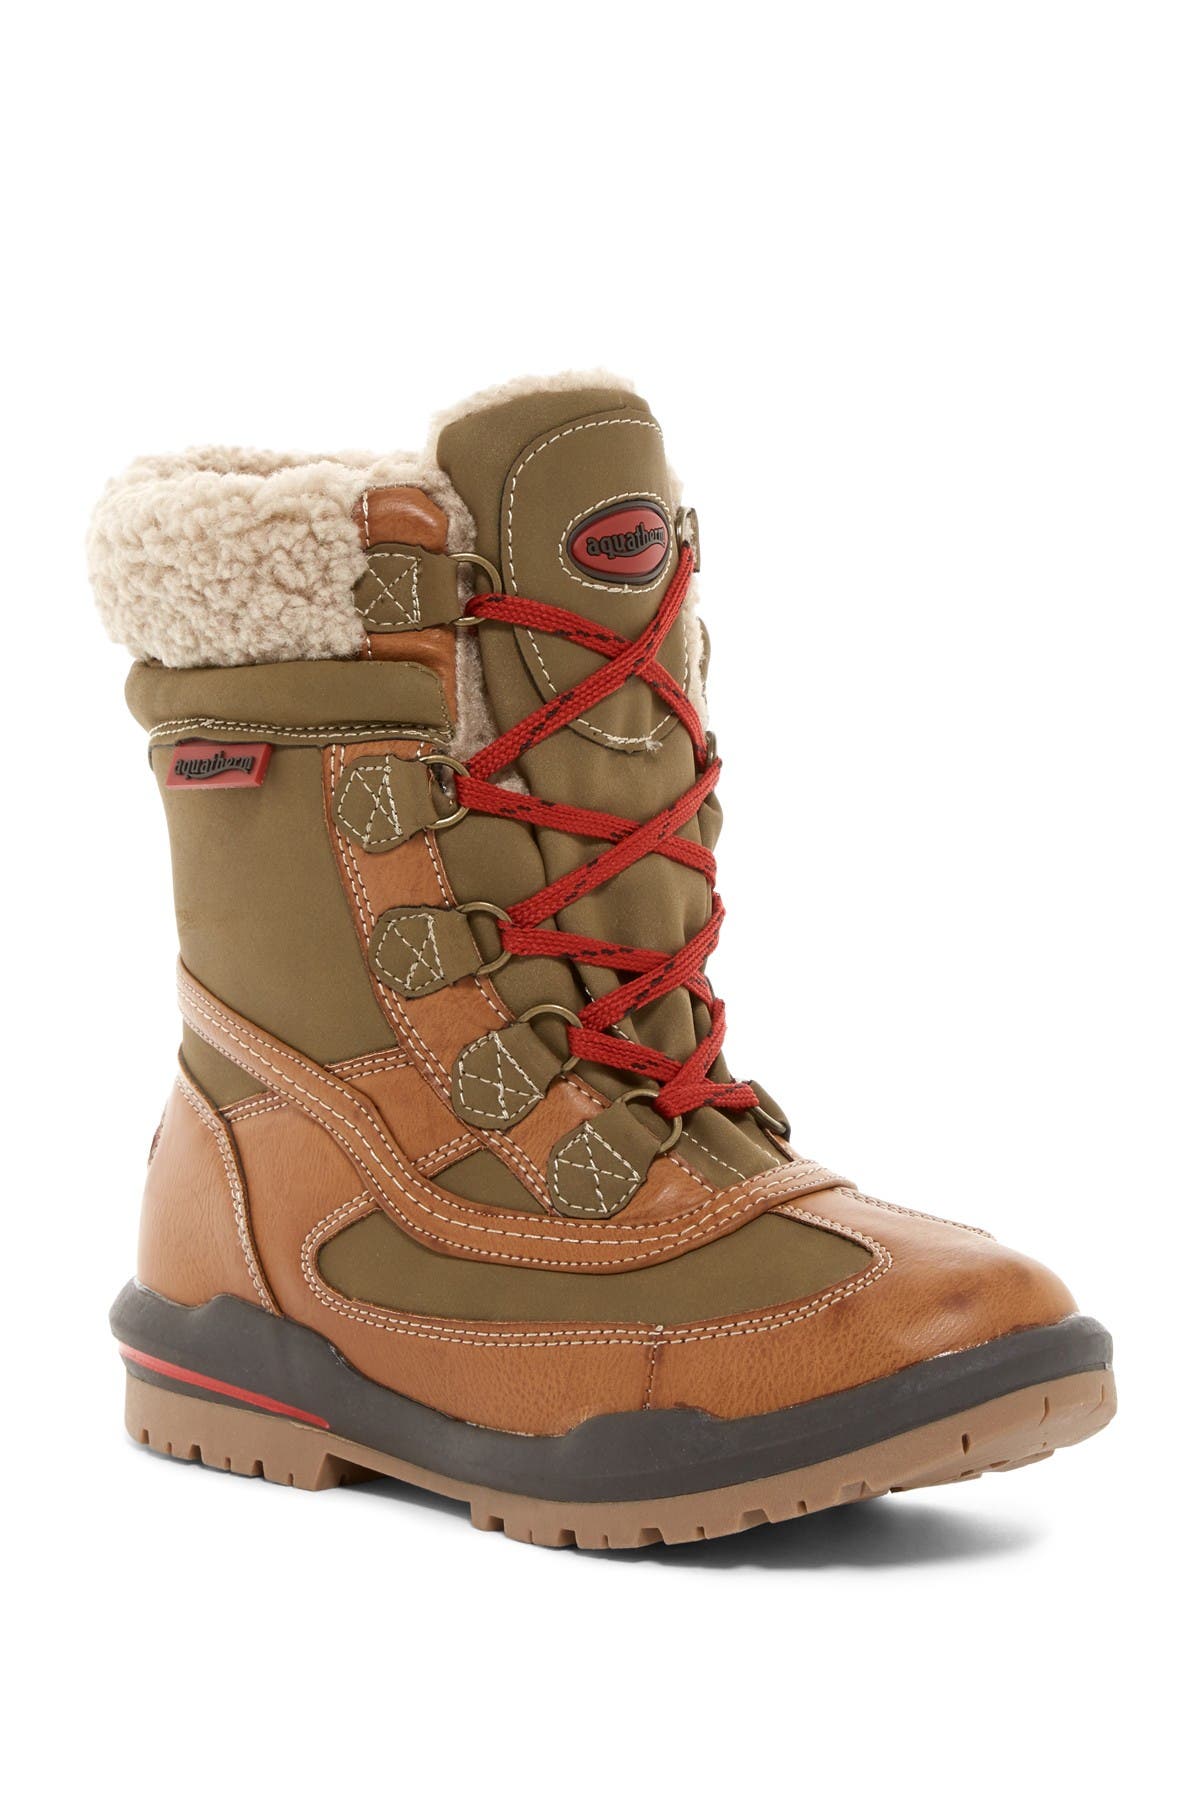 aquatherm thinsulate boots